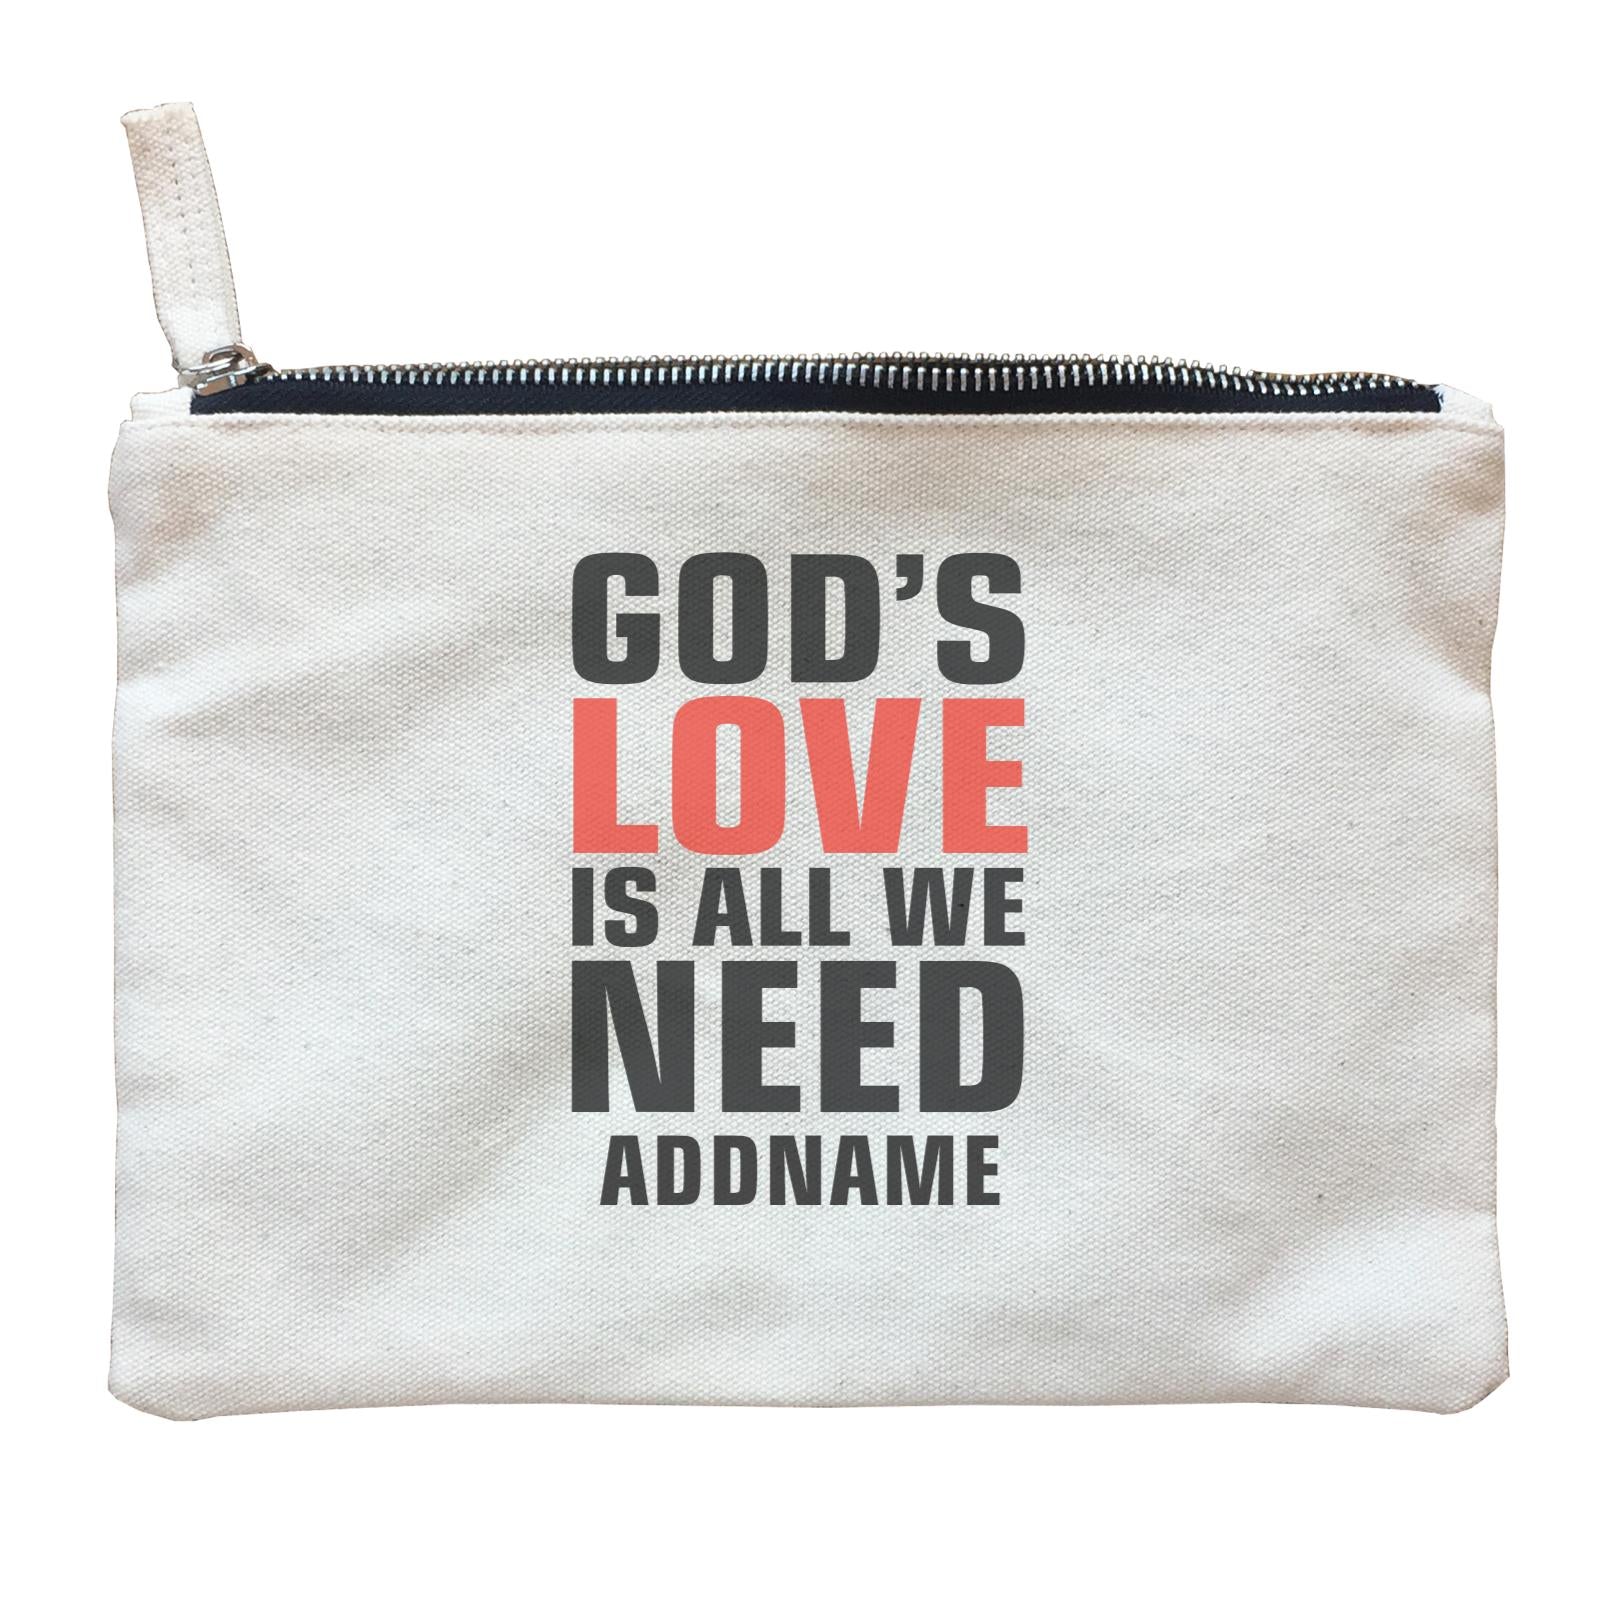 Inspiration Quotes God's Love Is All We Need Addname Zipper Pouch